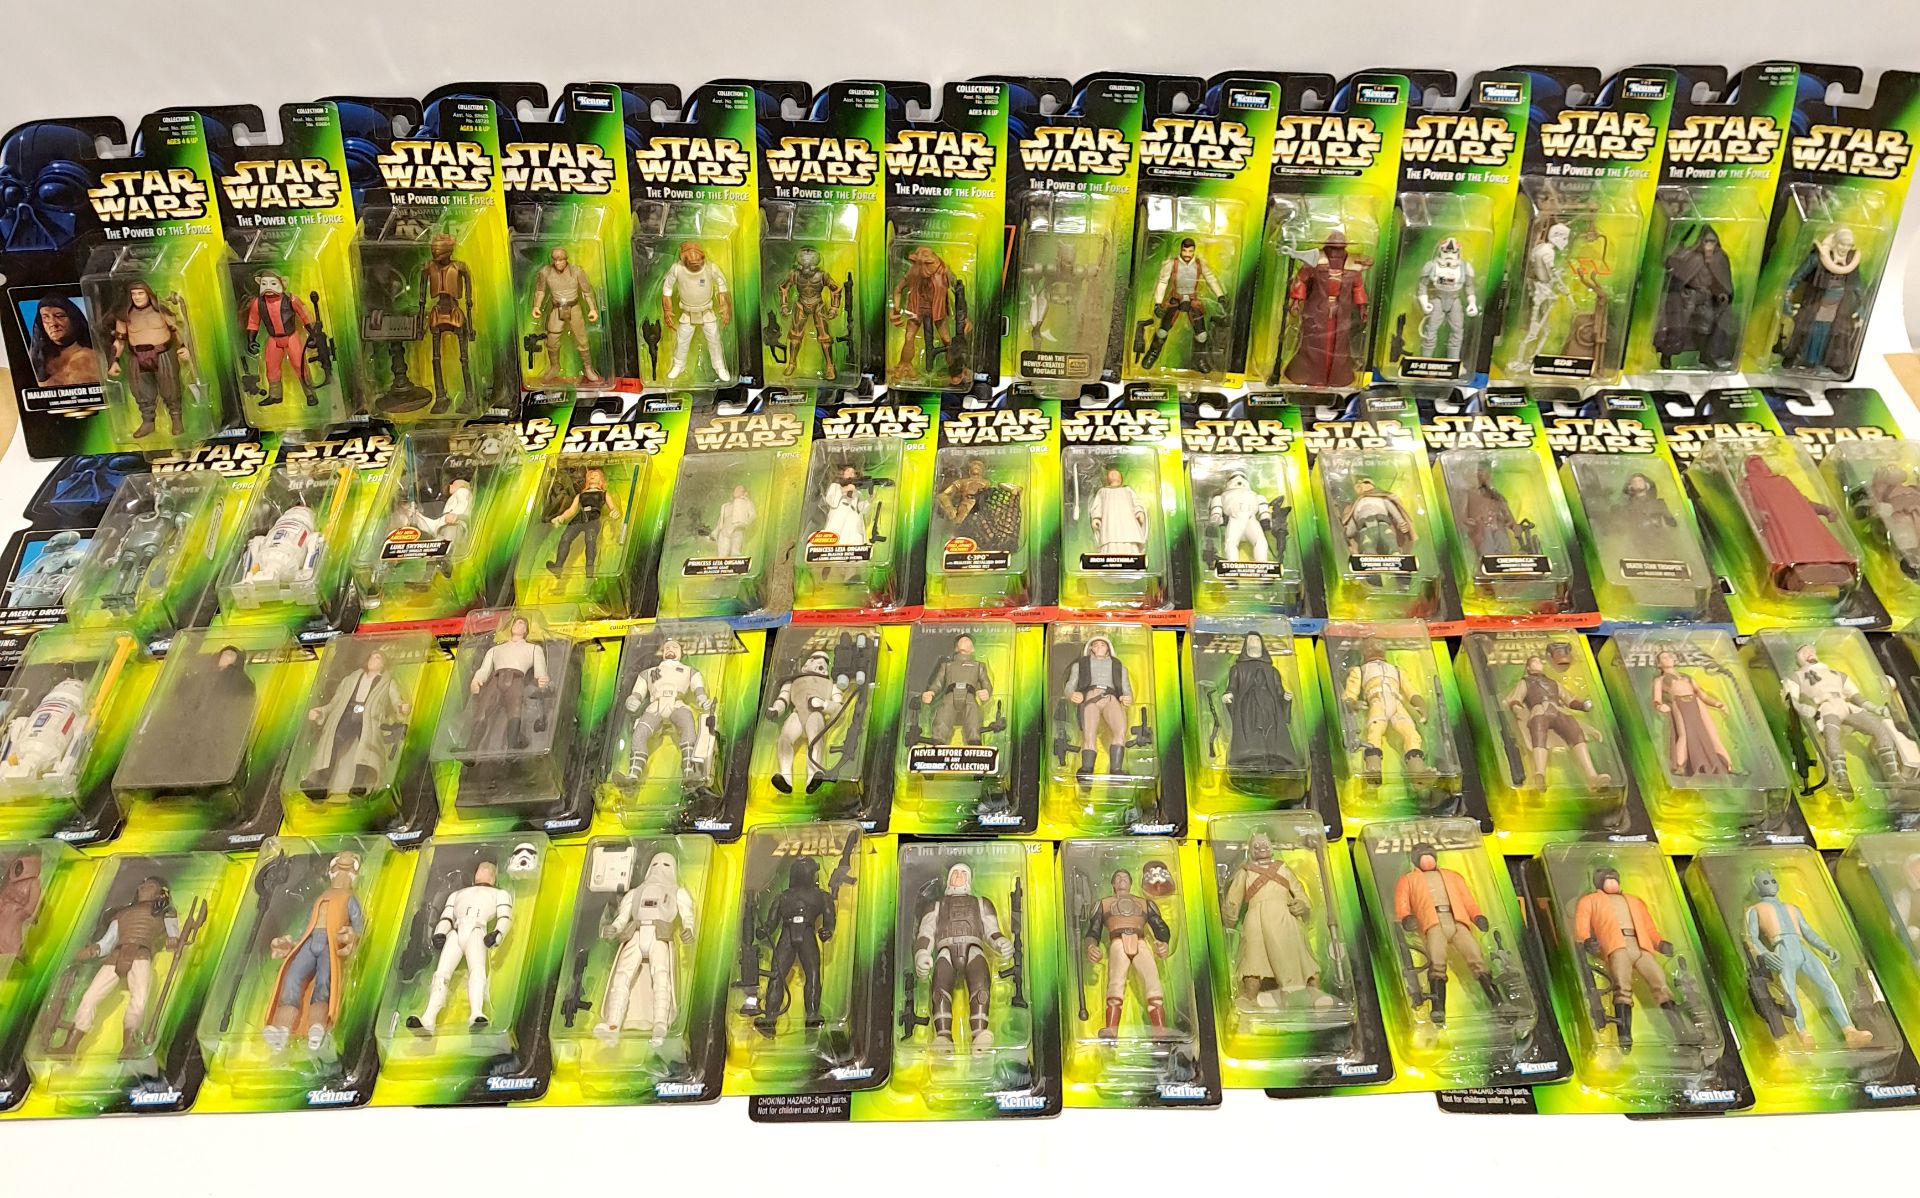 Quantity of Kenner Star Wars Power of the Force Carded Figures